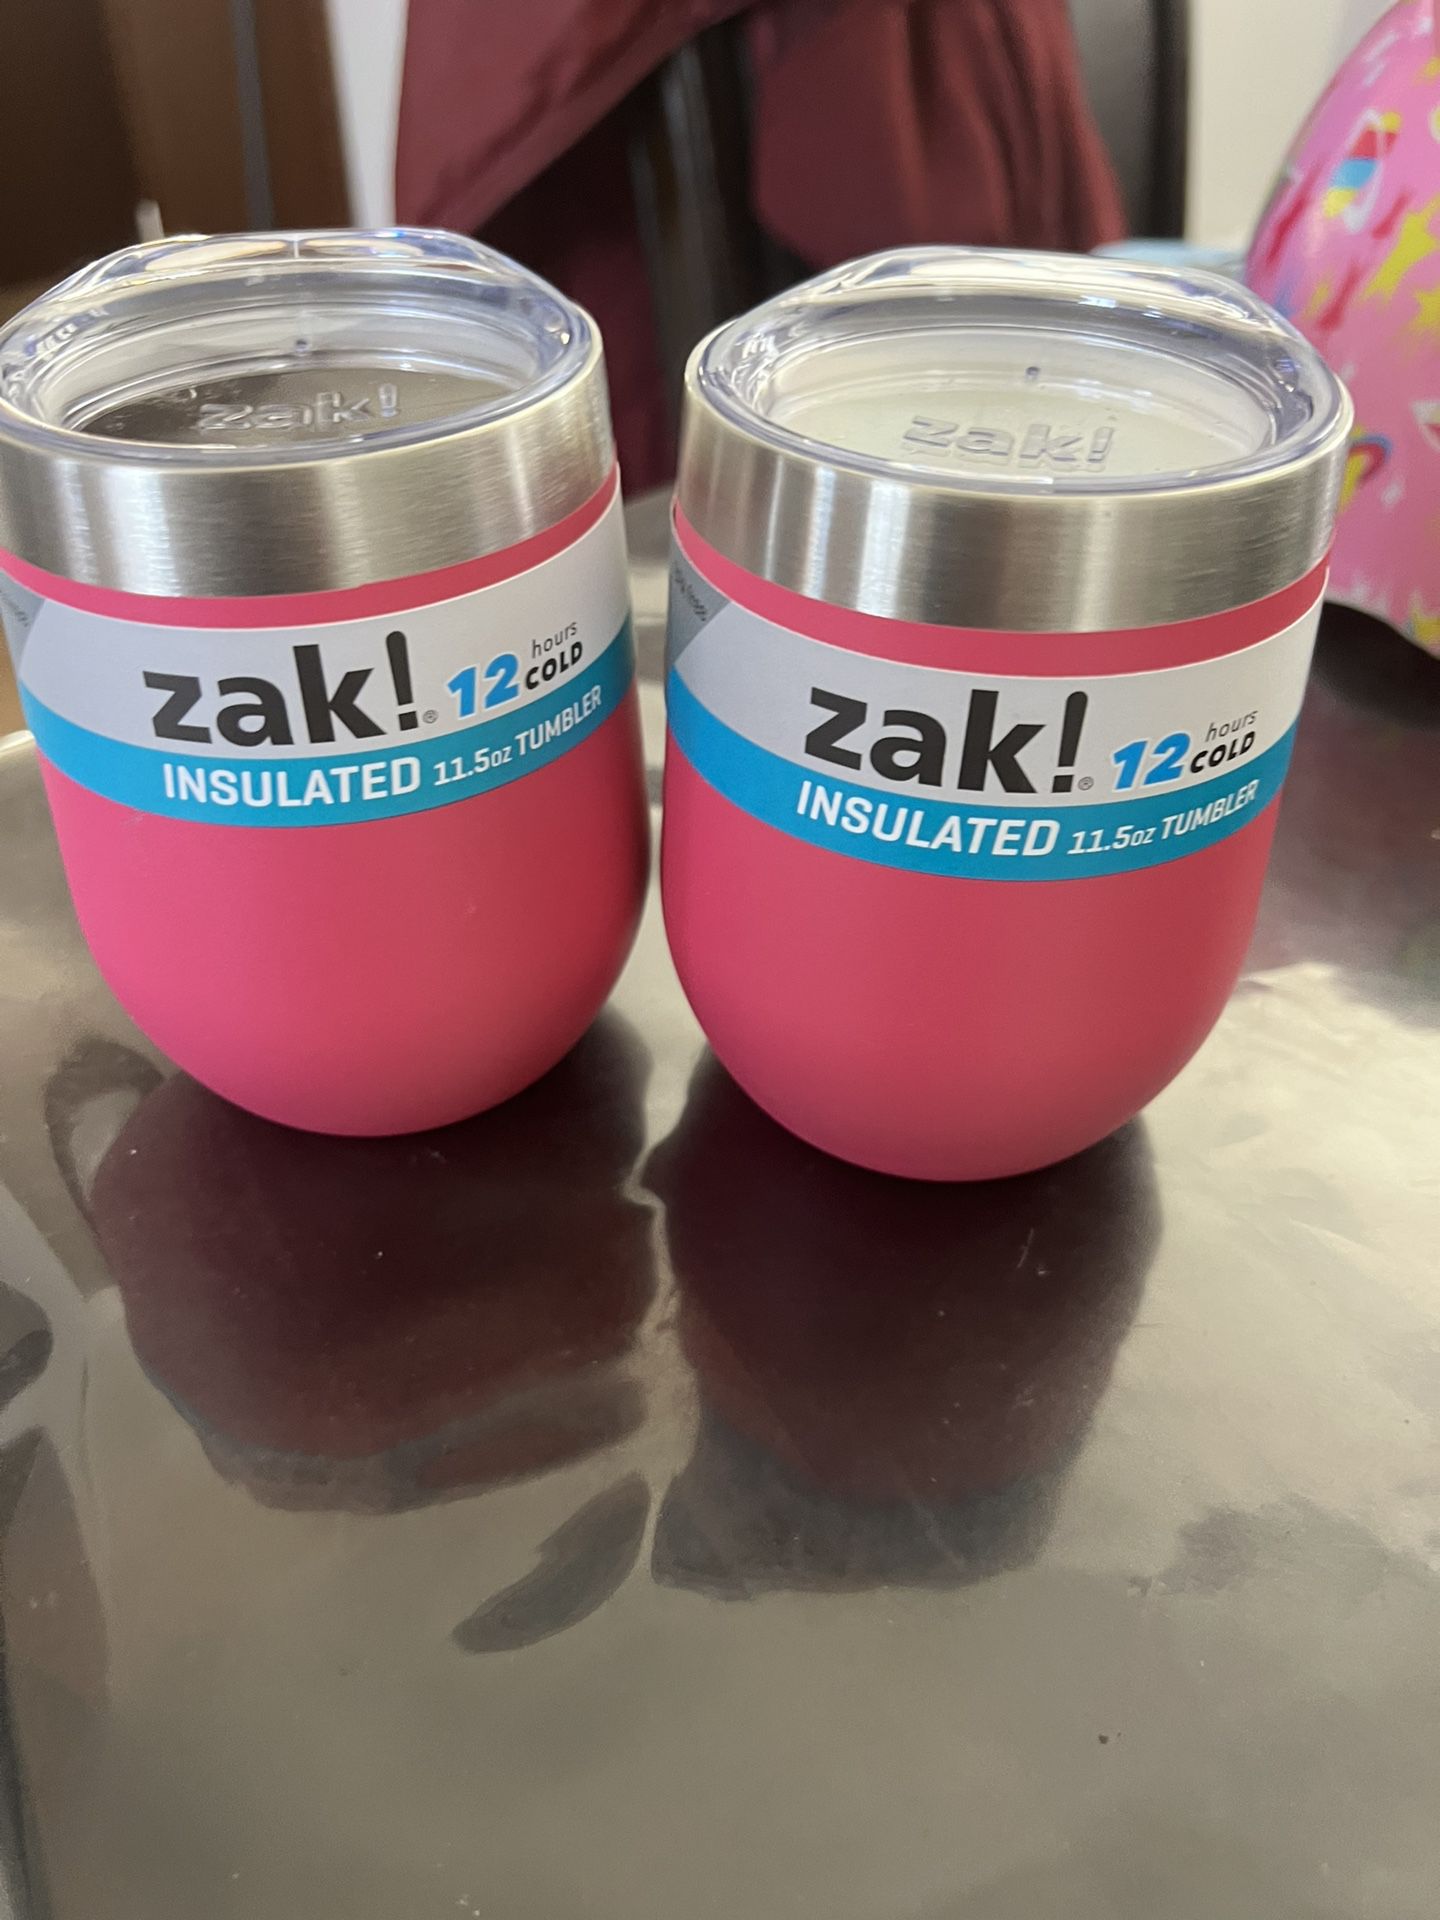 Zak! Designs 12oz Double Wall Stainless Steel Tumbler, Pink